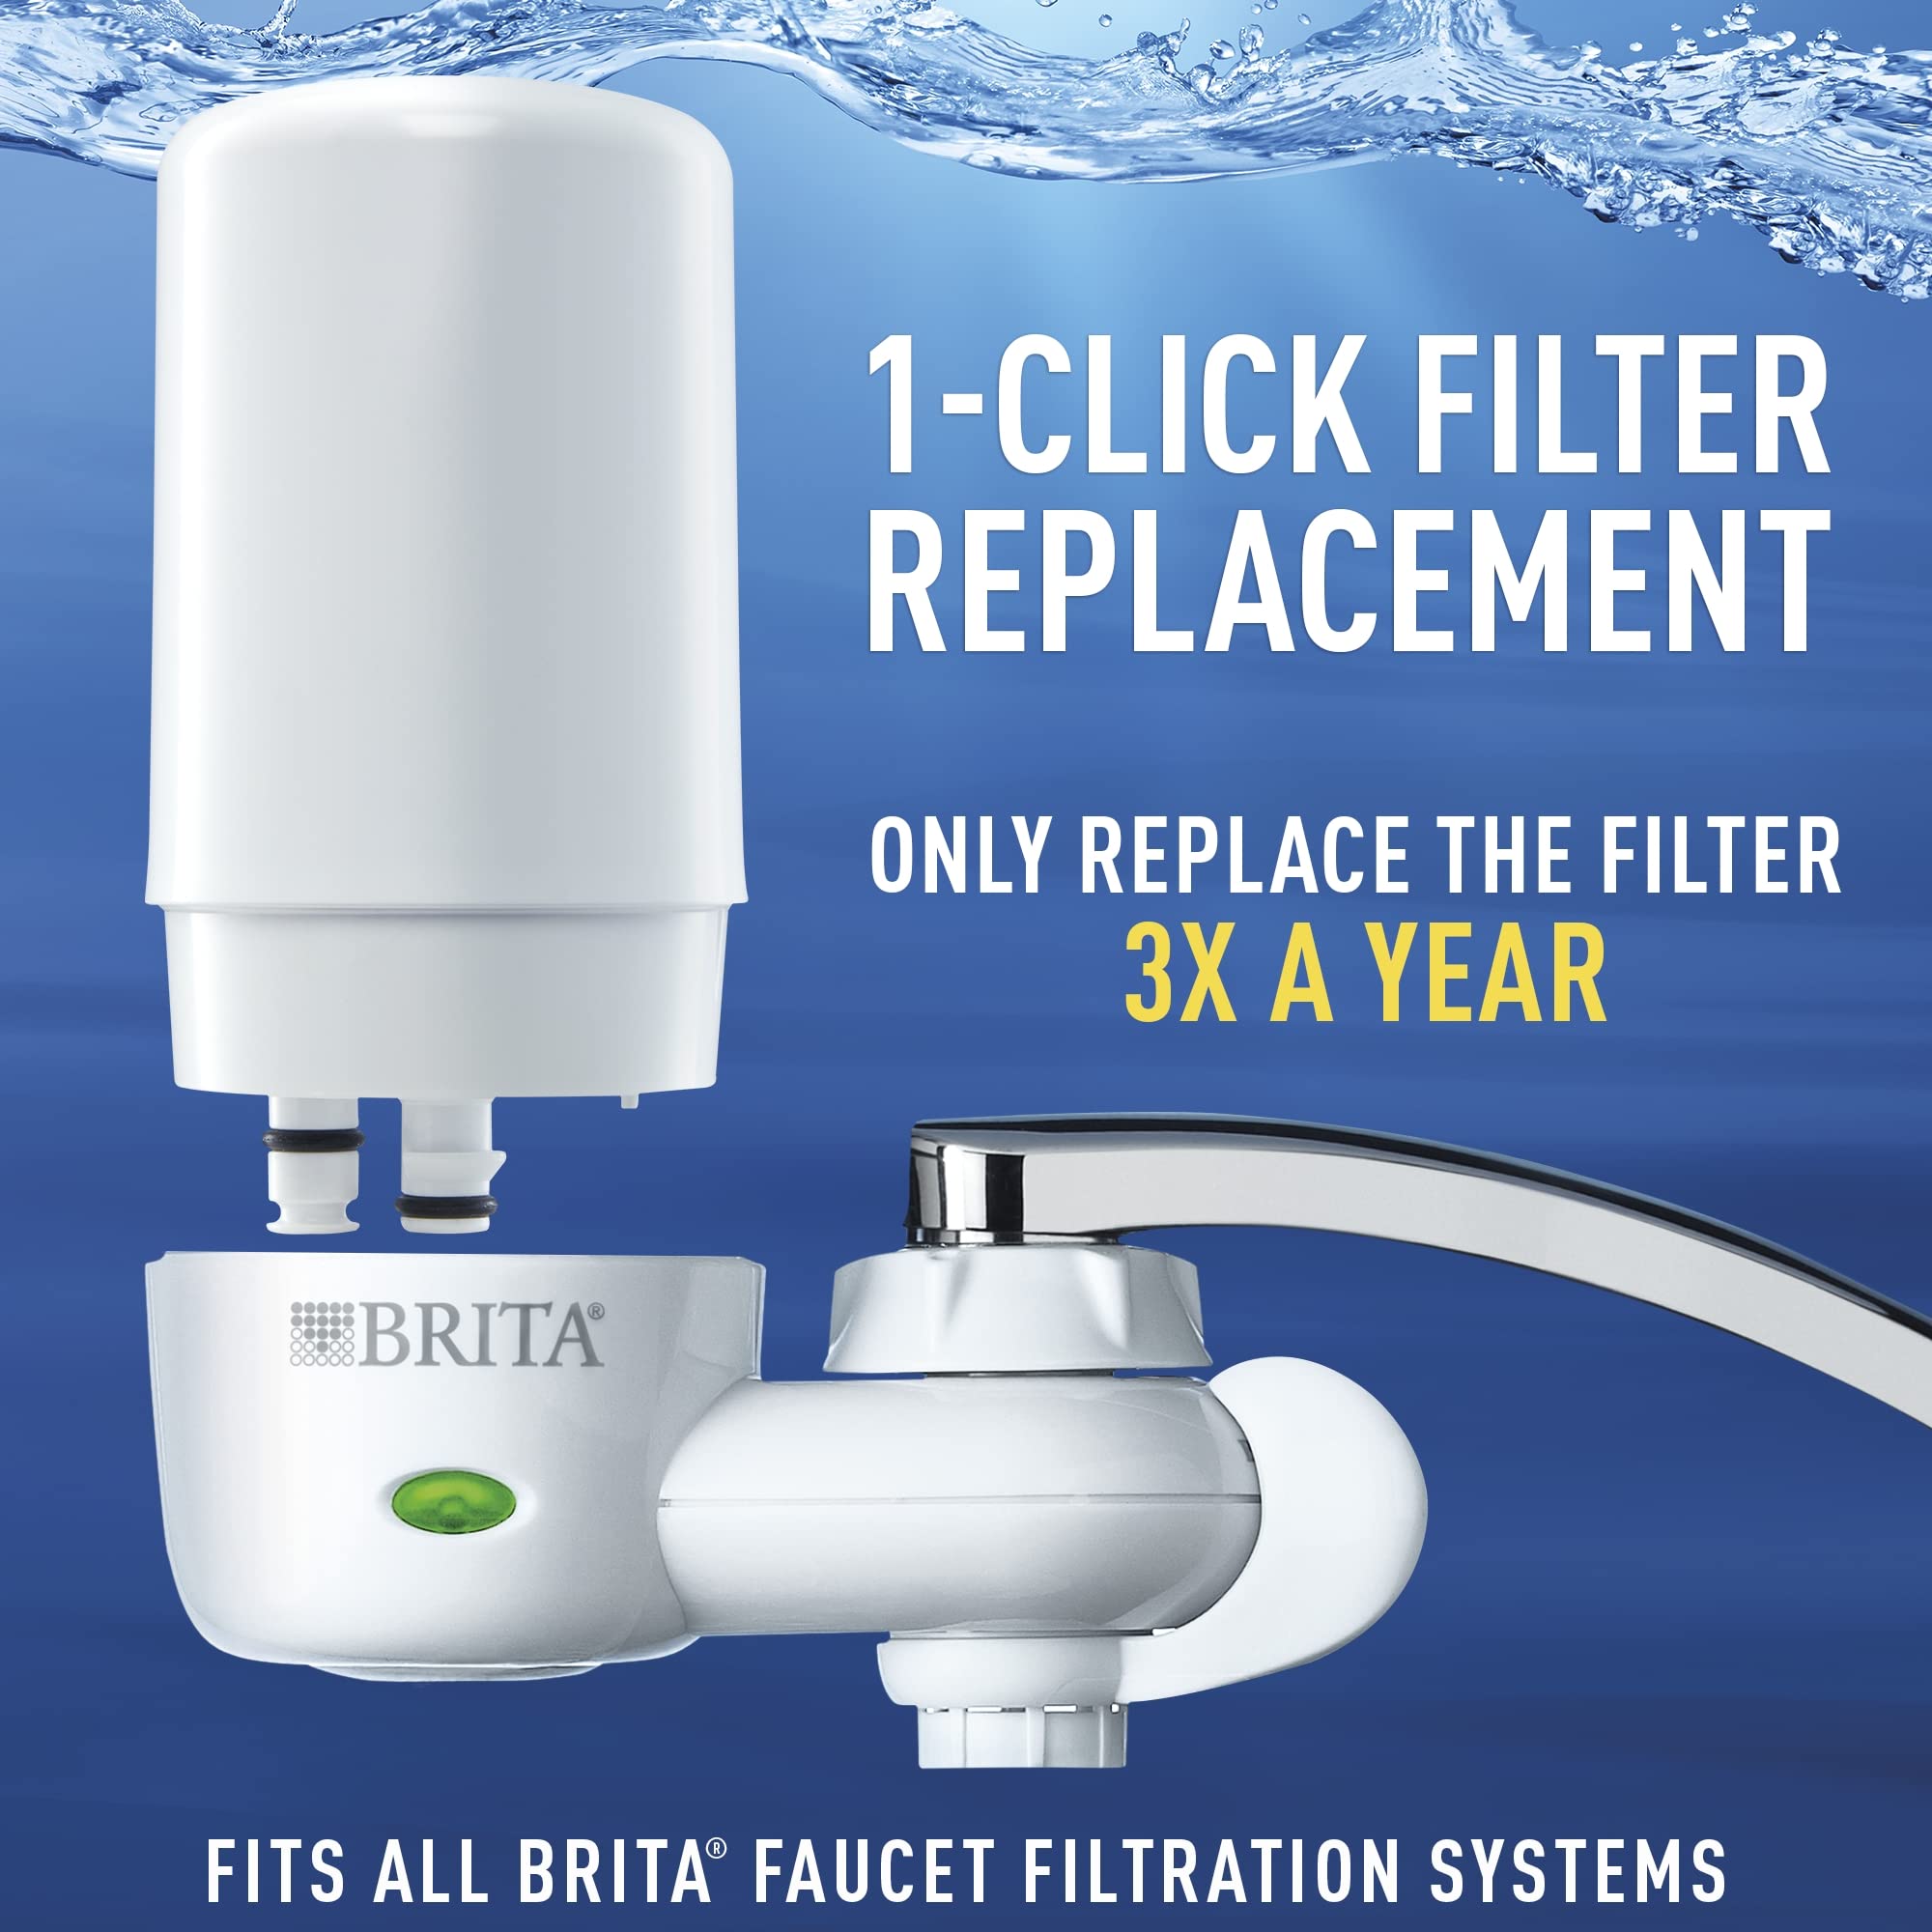 Brita Water Filter for Sink, Faucet Mount Water Filtration System for Tap Water with 3 Replacement Filters, Reduces 99% of Lead, Chrome